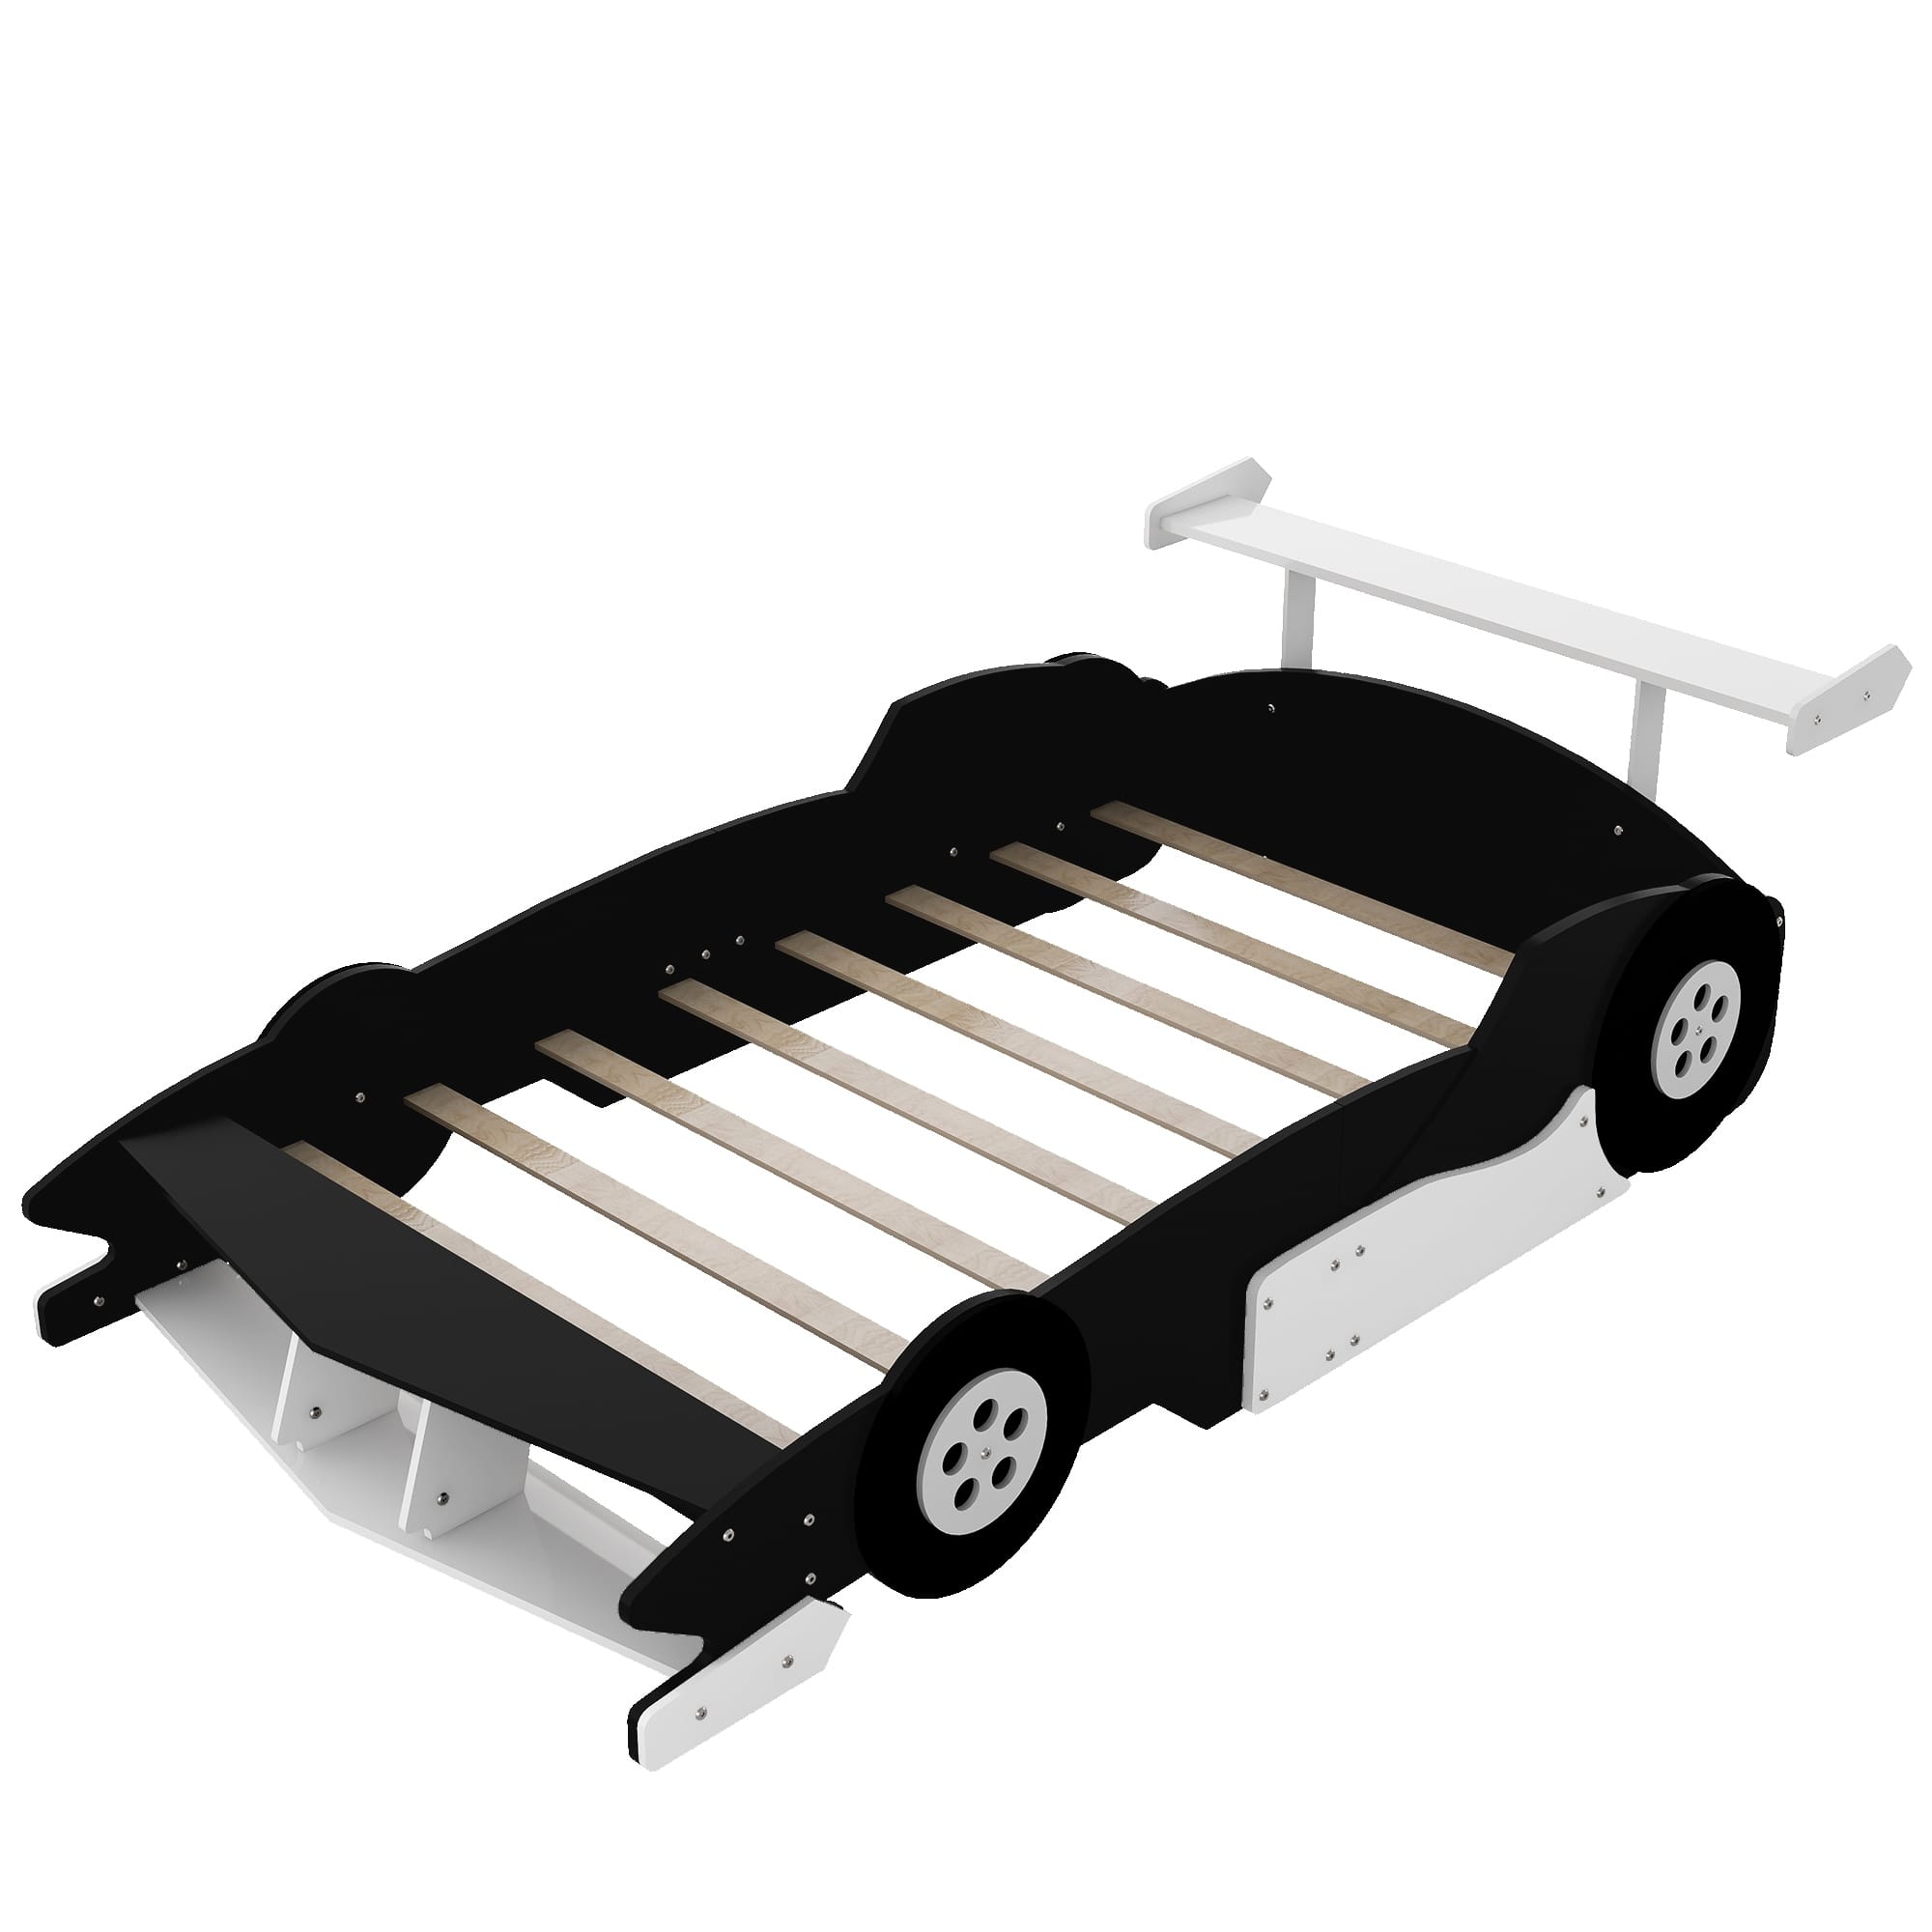 Full Kids Race Car Bed Fun Play with Wheels and Footboard, Navy Blue ...